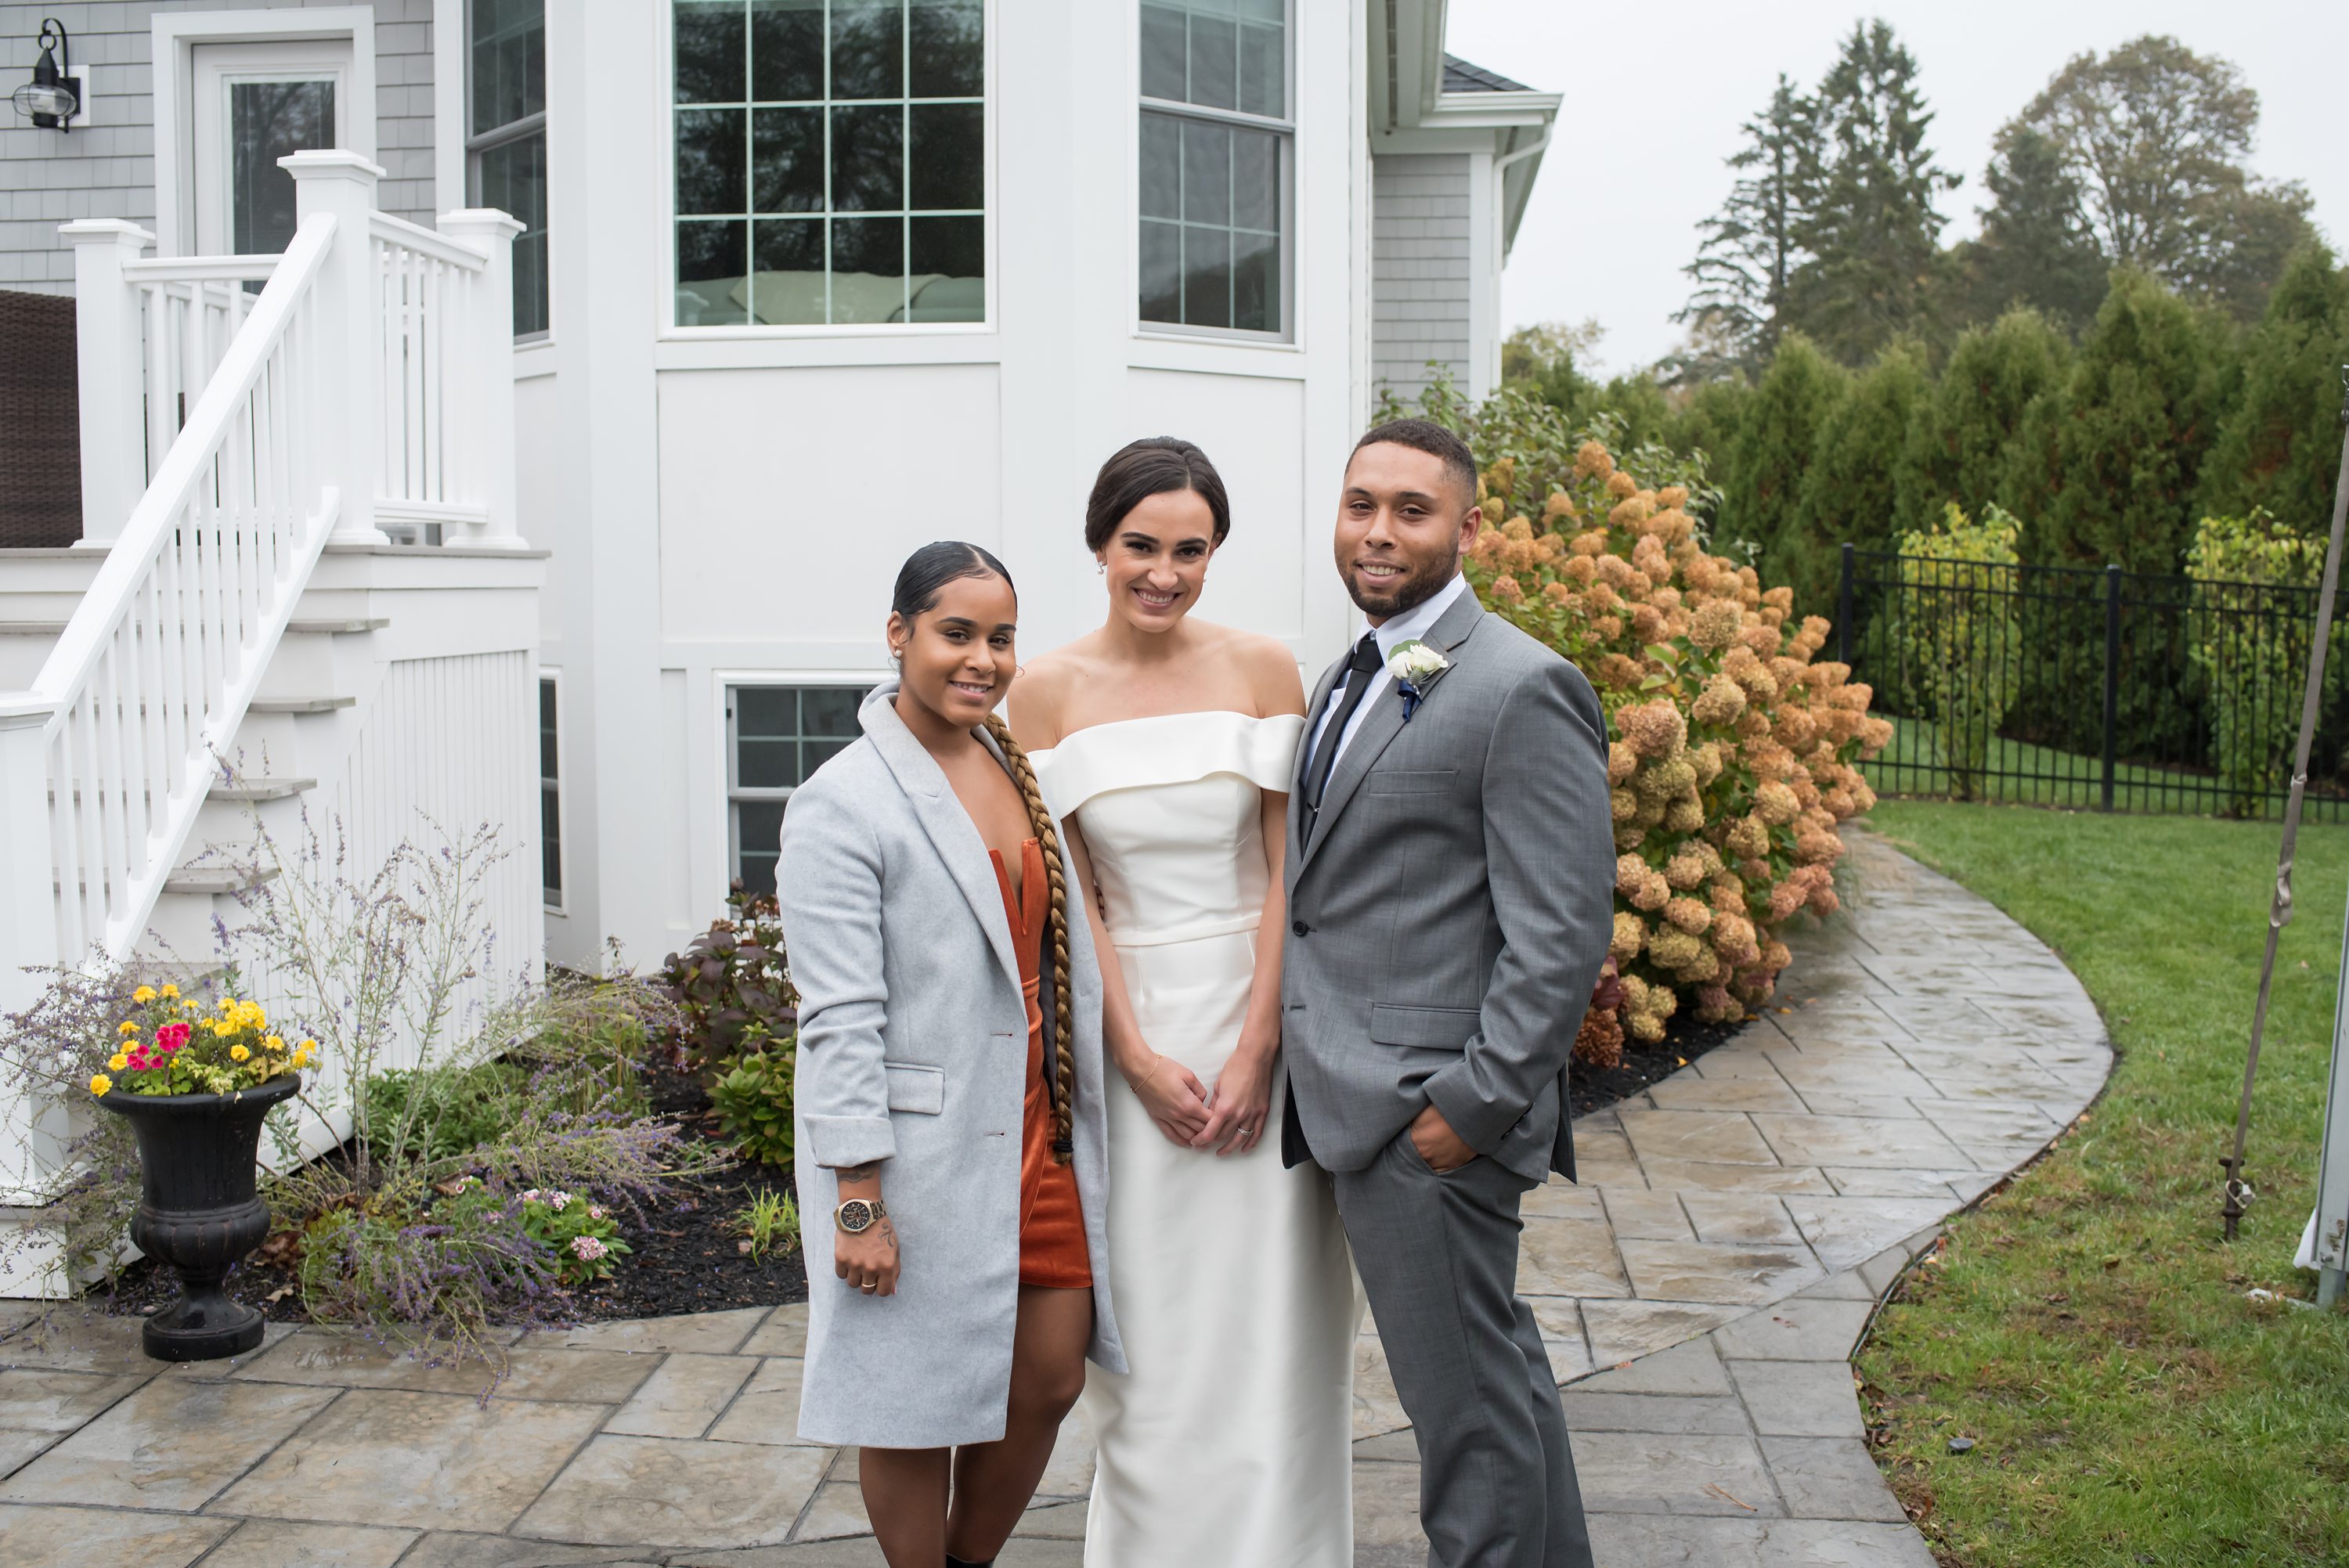 Providence Wedding Photographer,Plymouth Wedding Photographer,Massachusetts Backyard Wedding,Intimate backyard wedding,Tented Backyard Wedding,Russel Morin Catering,Wedding At Home,Massachusetts Elopement